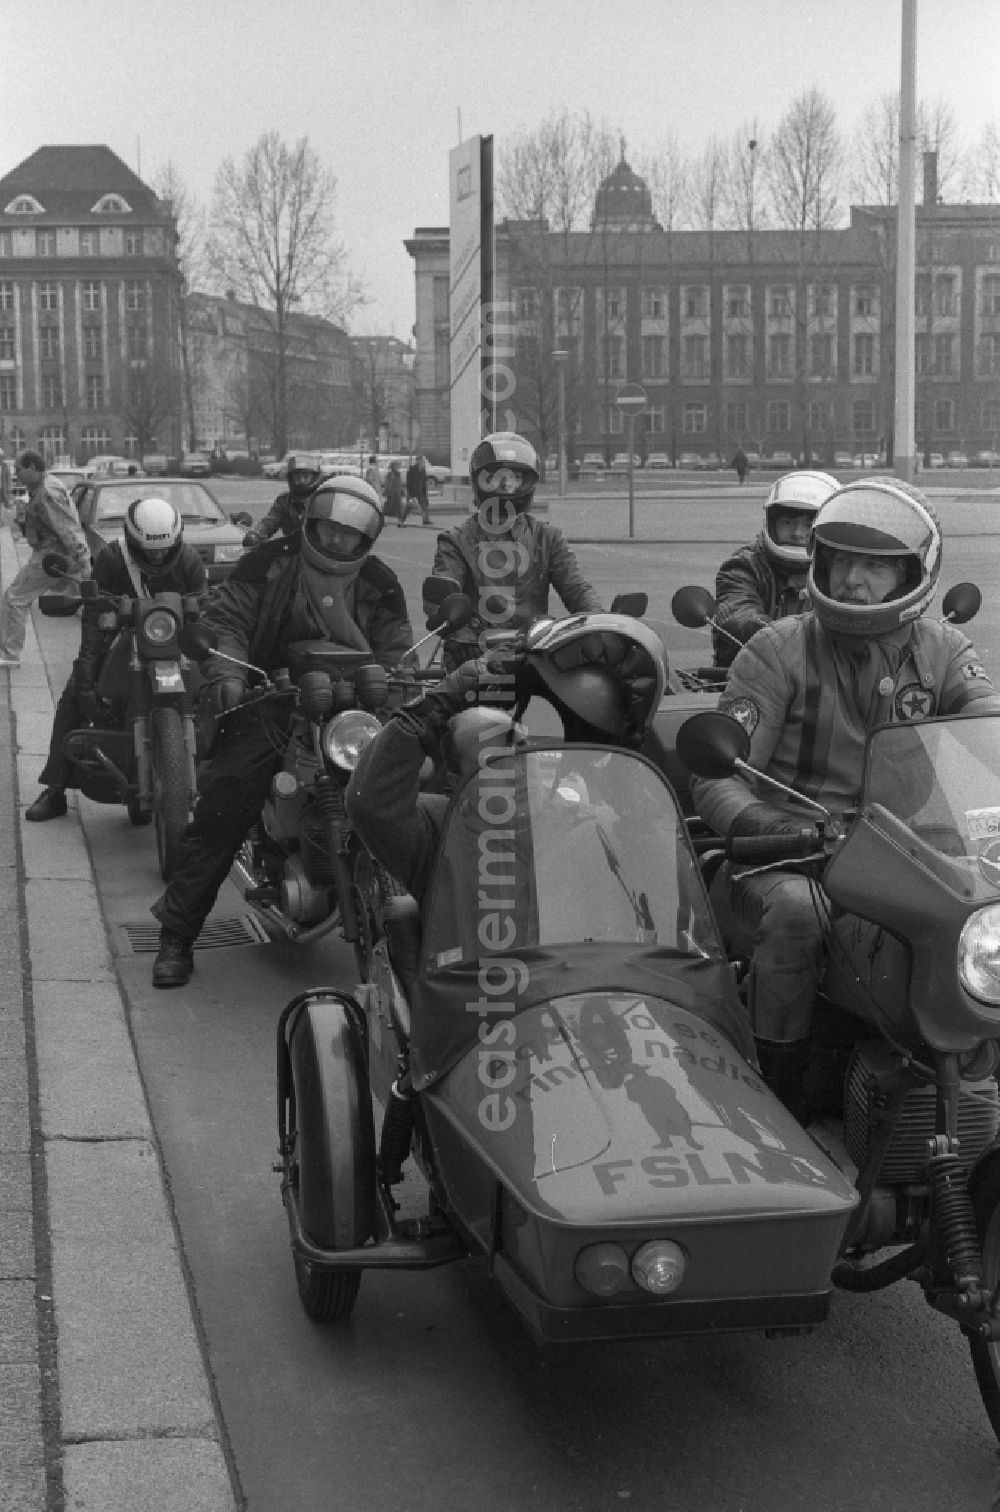 GDR photo archive: Berlin - PDS - left - politician Gregor Gysi drives with the sidecar of an MZ - motorcycle in front of the entrance of the former Central Committee of the SED and headquarters of the PDS (today's Foreign Office - Ministry of Foreign Affairs) on street Werderscher Markt in the district Mitte in Berlin East Berlin in the area of the former GDR, German Democratic Republic